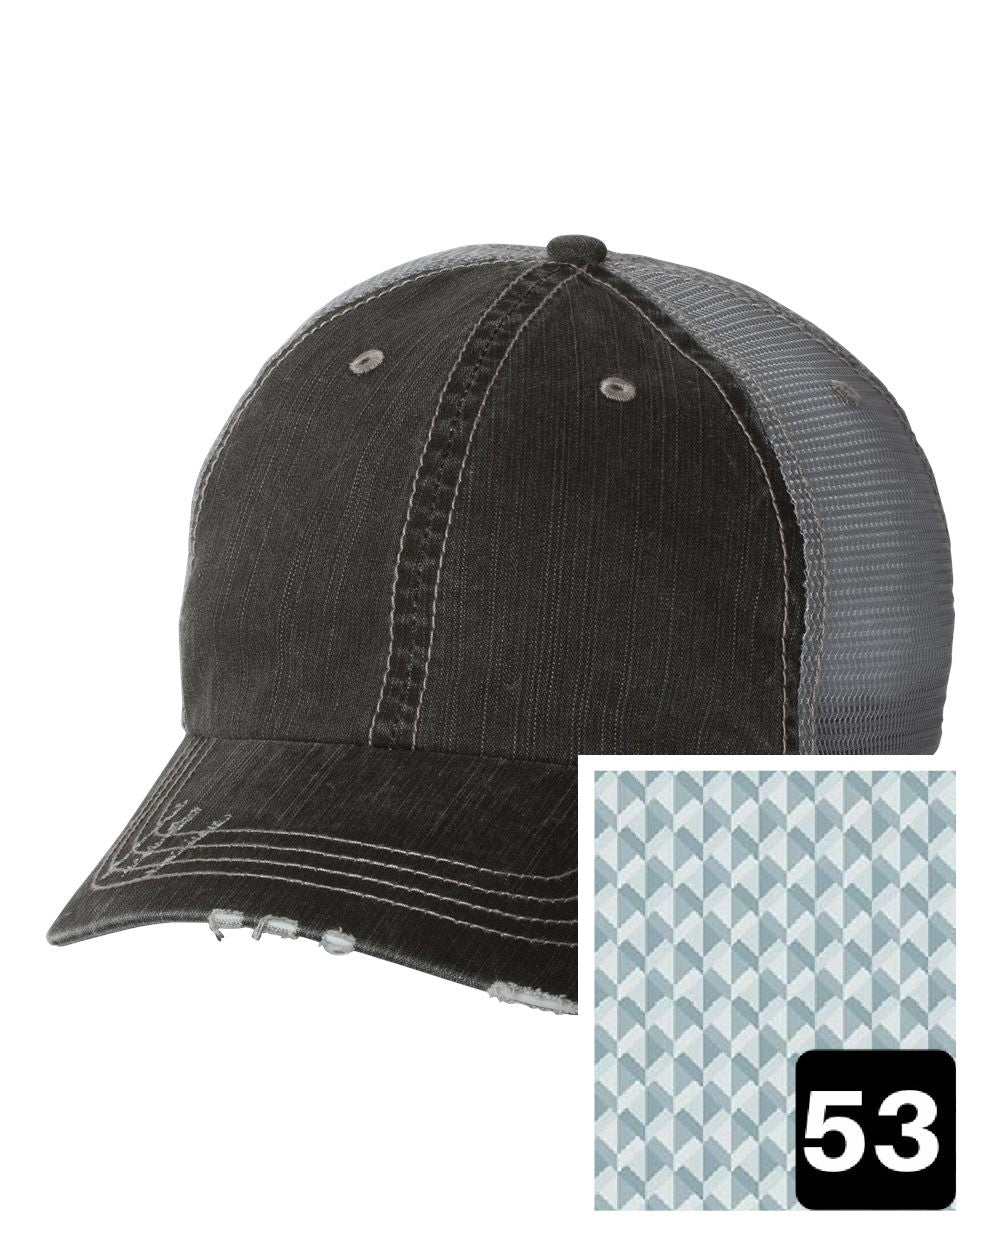 gray distressed trucker hat with multi-color stripe fabric state of Tennessee